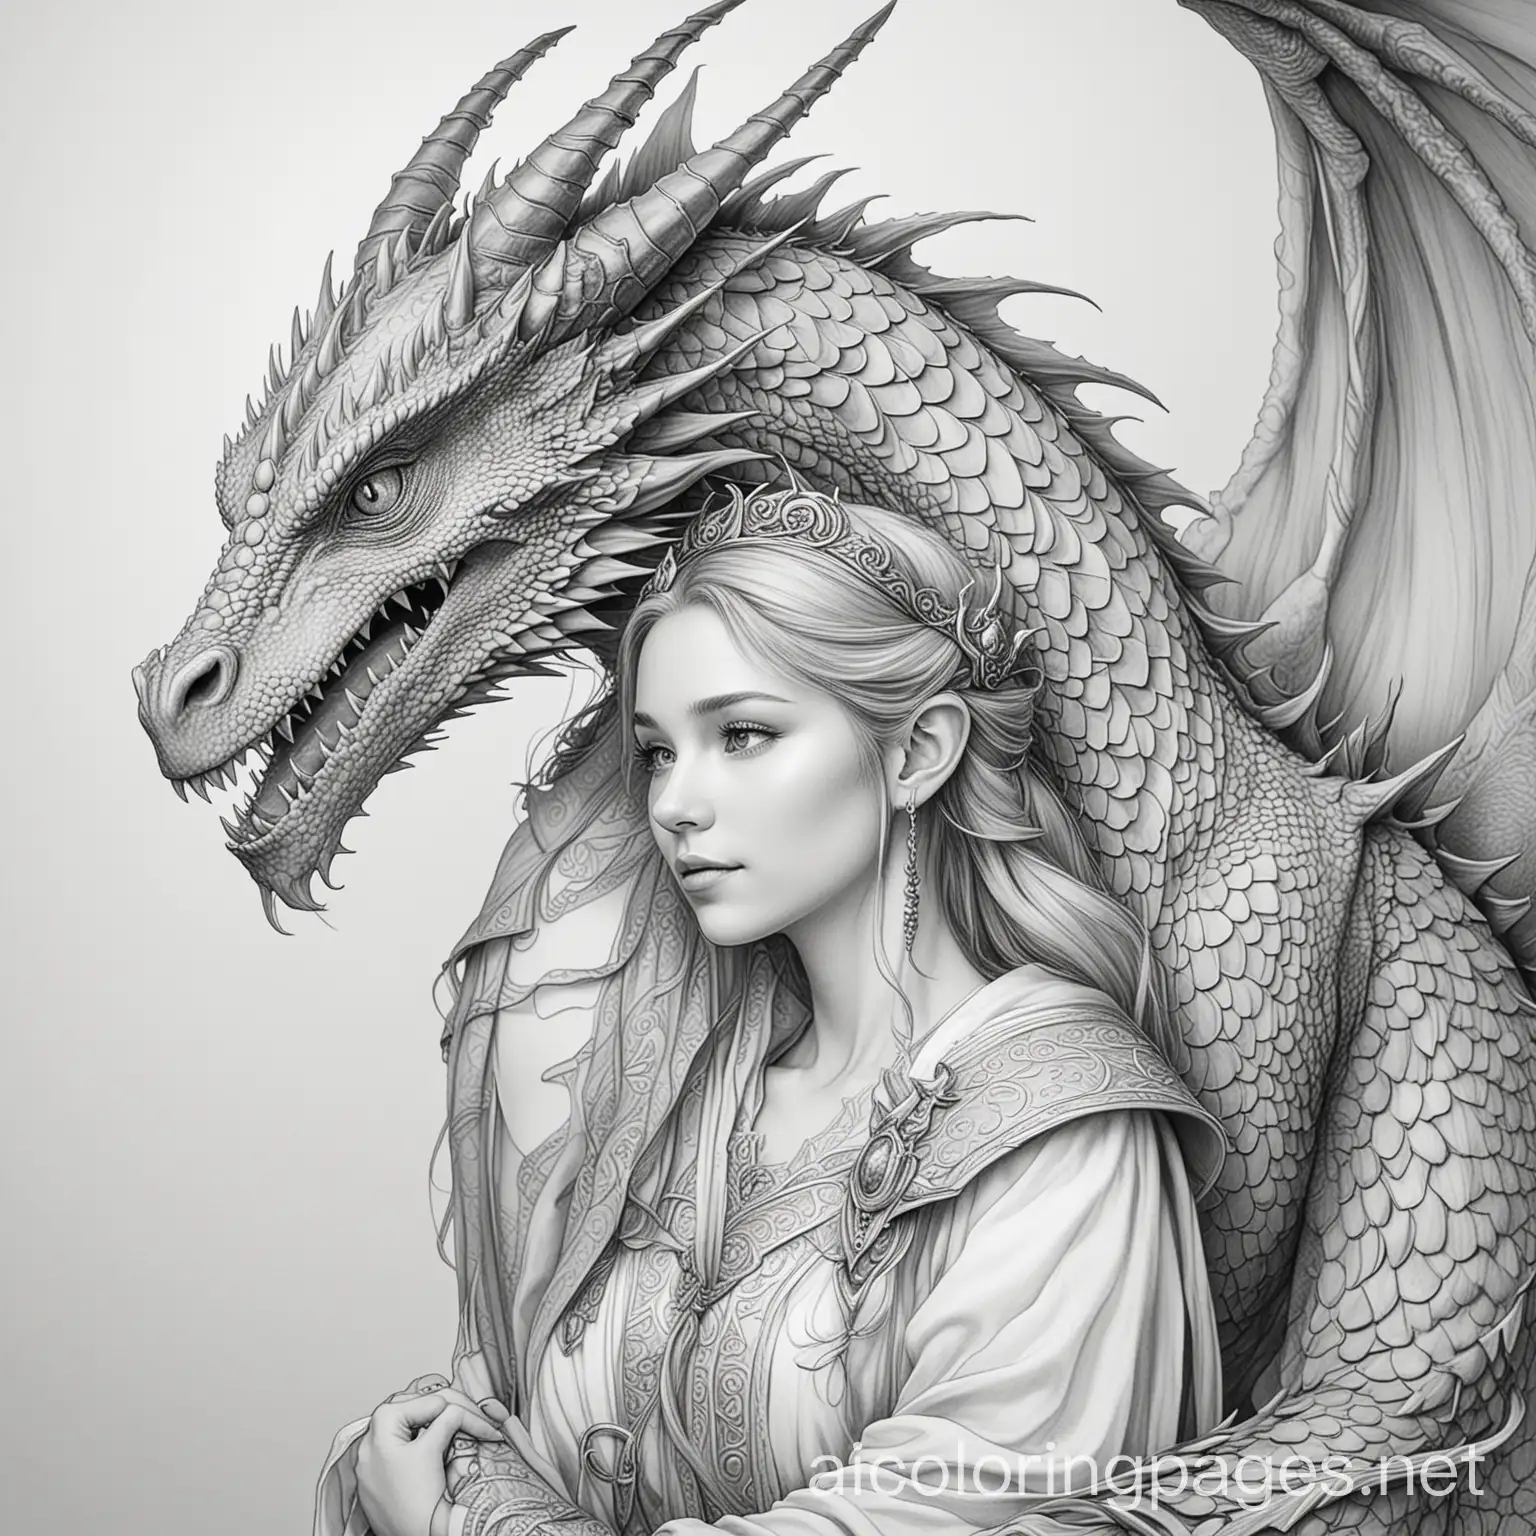 Real Dragon with a princess, Coloring Page, black and white, line art, white background, Simplicity, Ample White Space. The background of the coloring page is plain white to make it easy for young children to color within the lines. The outlines of all the subjects are easy to distinguish, making it simple for kids to color without too much difficulty